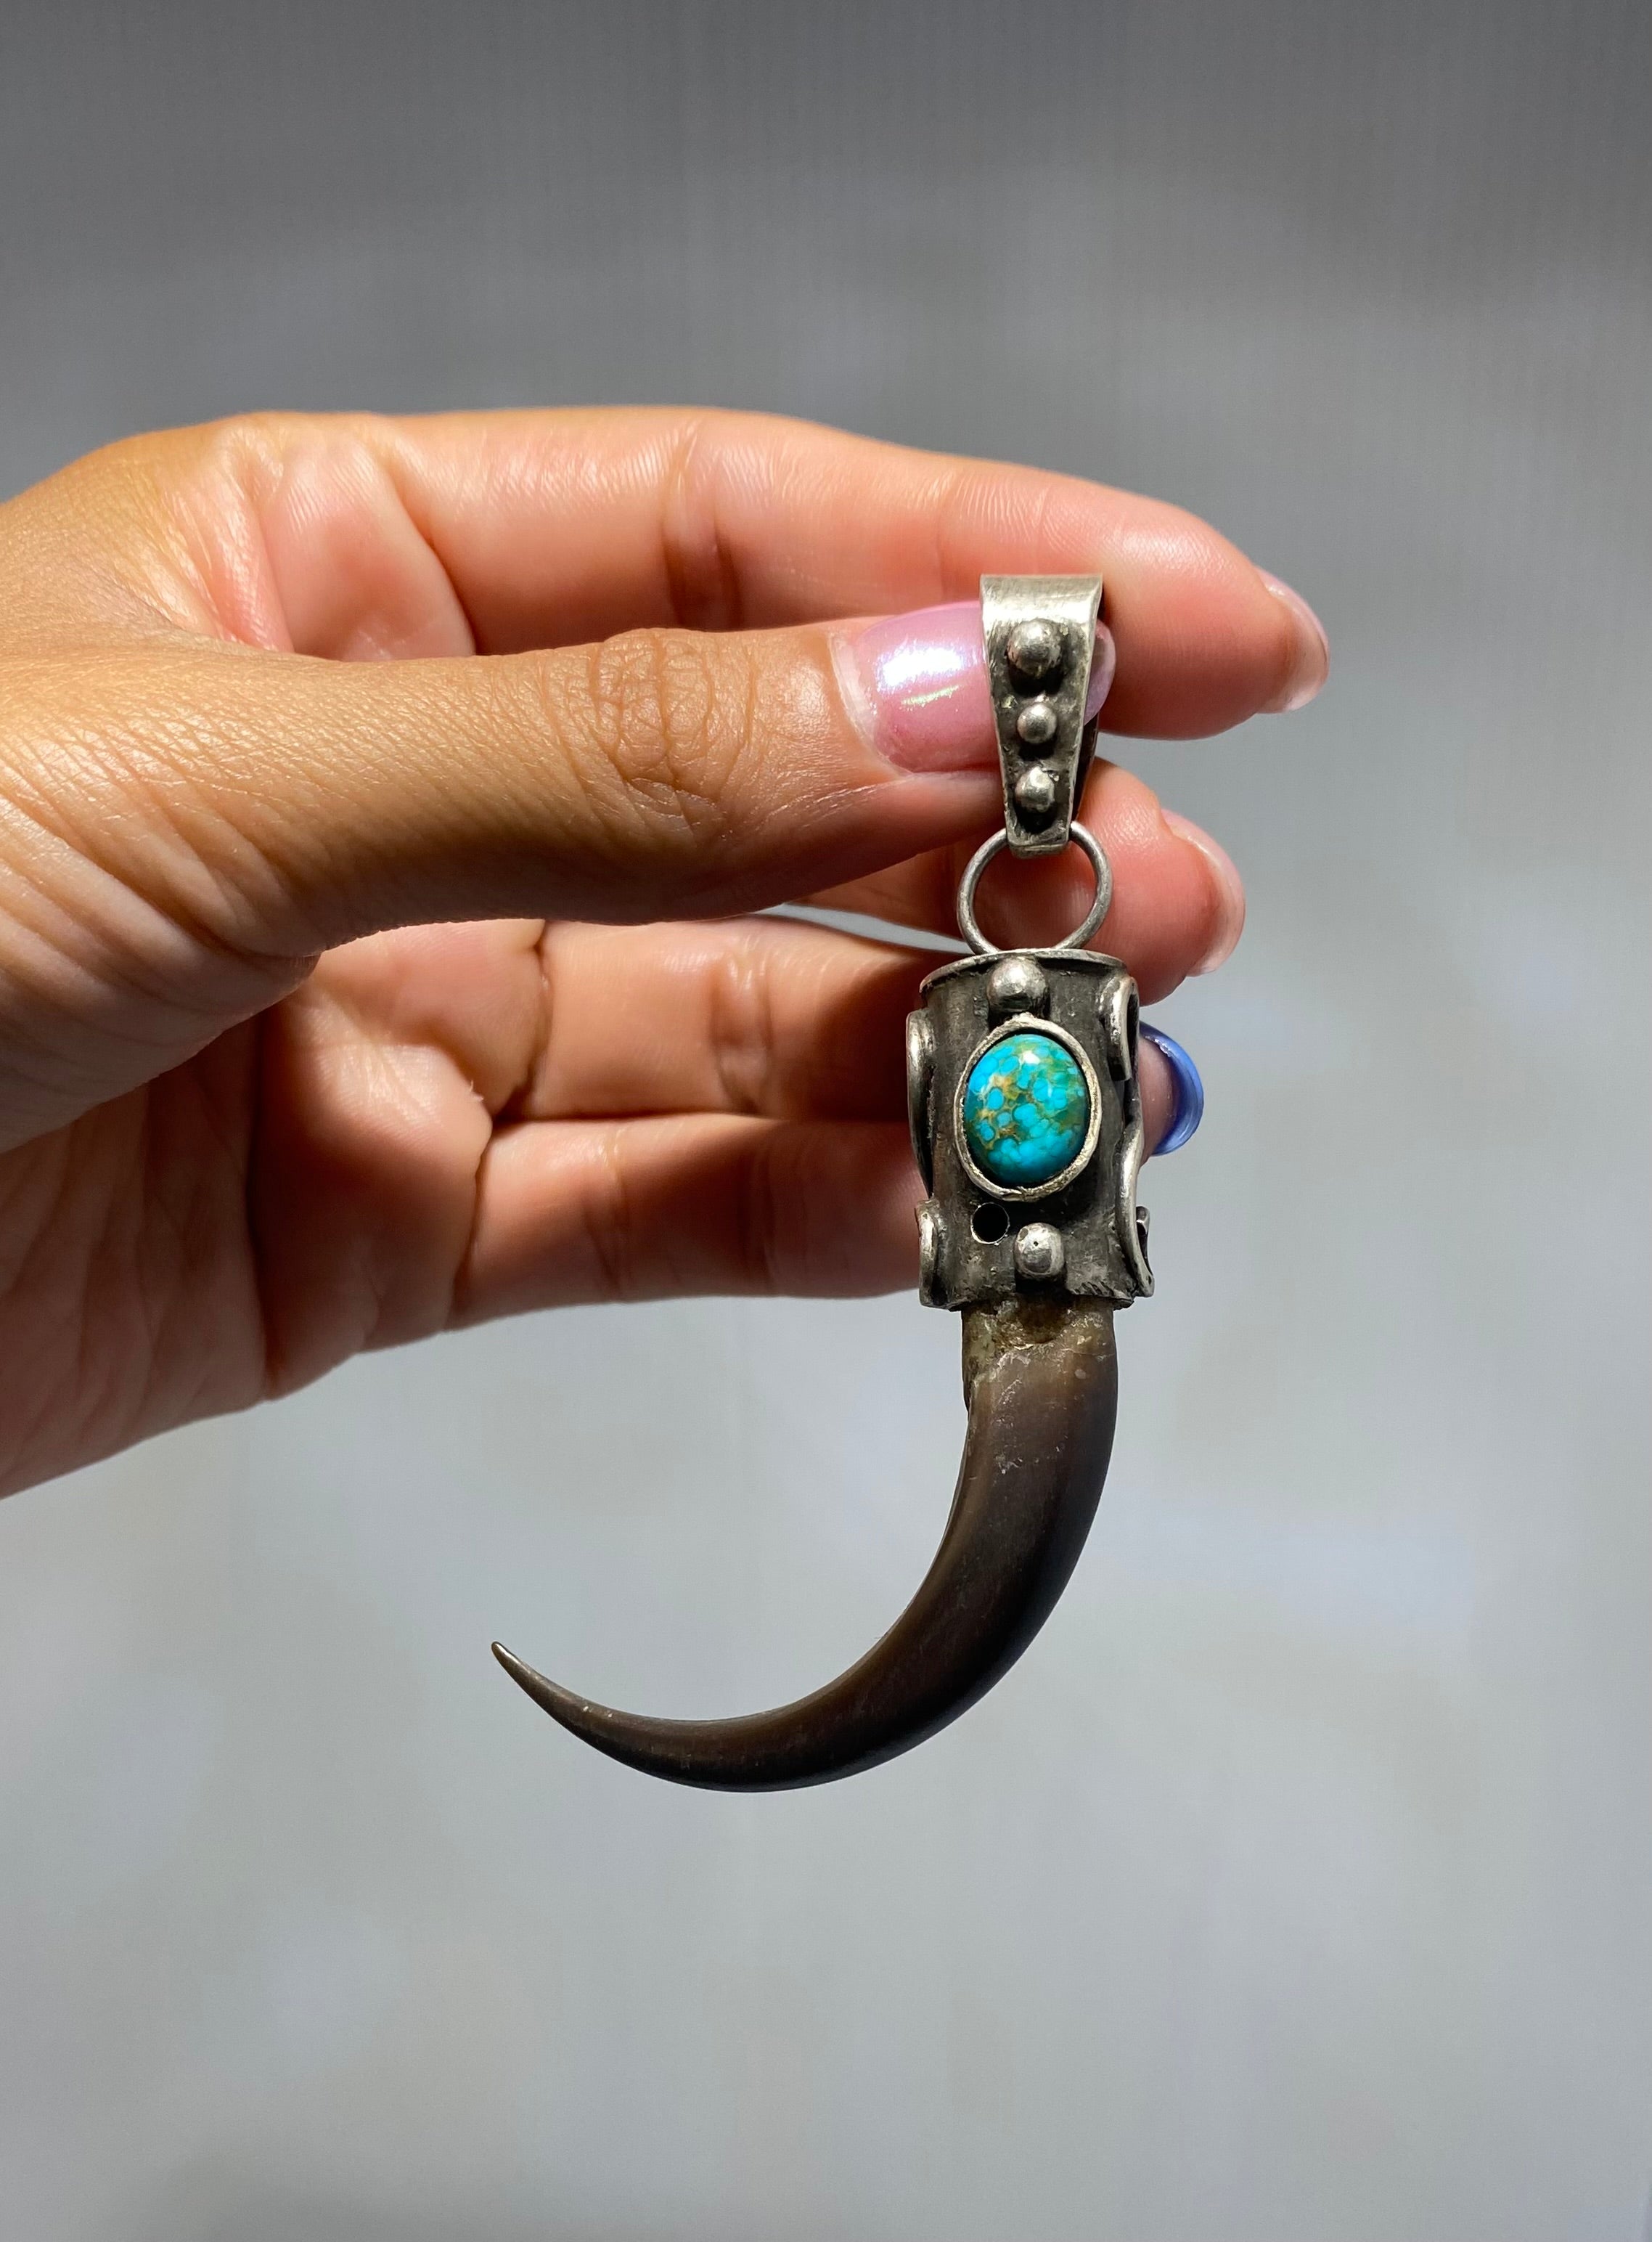 Vintage, Native American Navajo, Eagle claw with turquoise eye and sterling silver pendant.